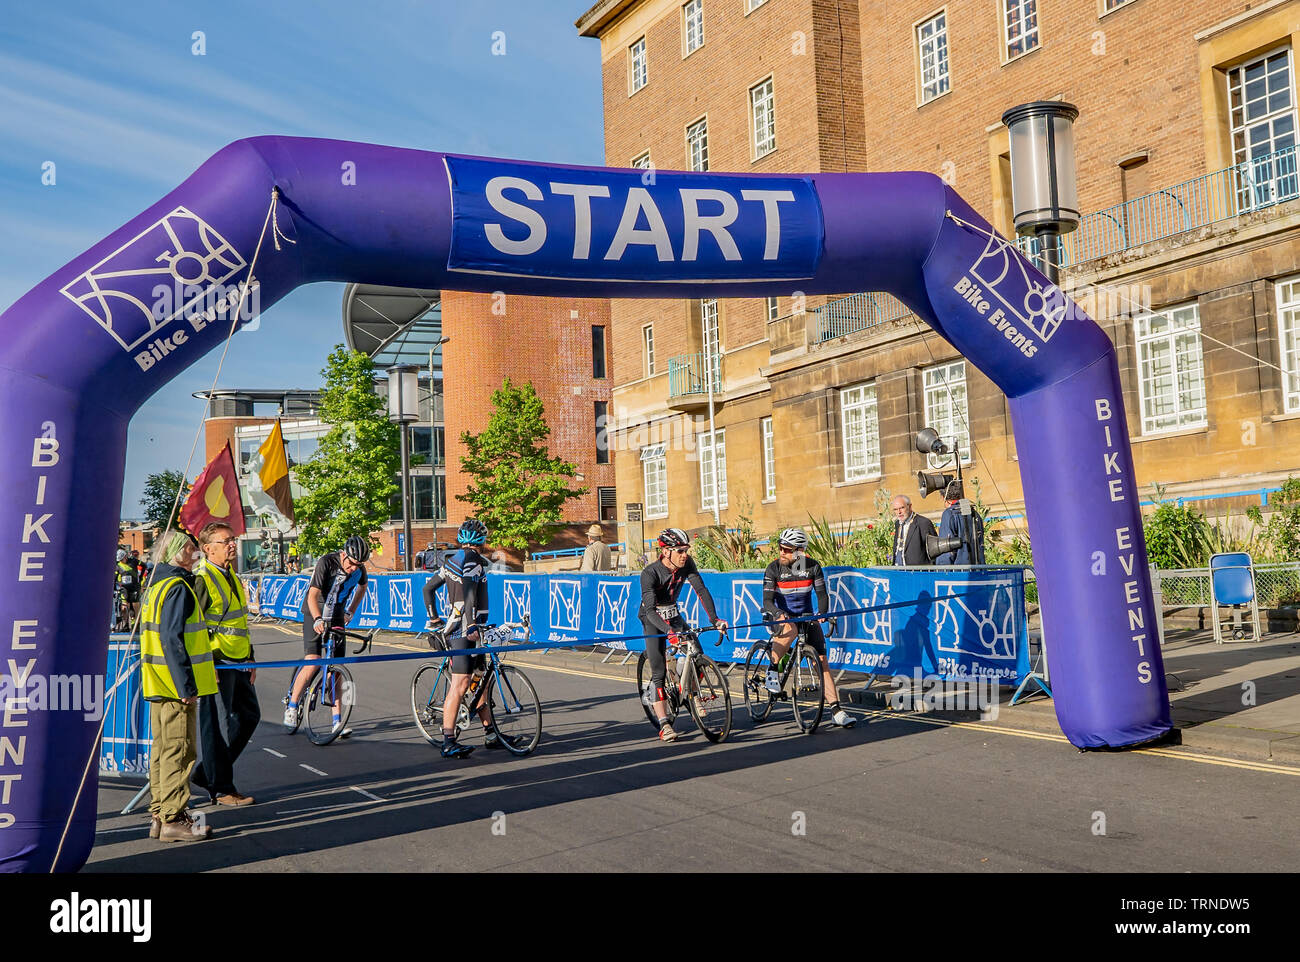 June 2019, Norwich 100 bike ride: Cyclists lined up at the start waiting  for the timing machine to start the countdown to the start of their 100mile  c Stock Photo - Alamy